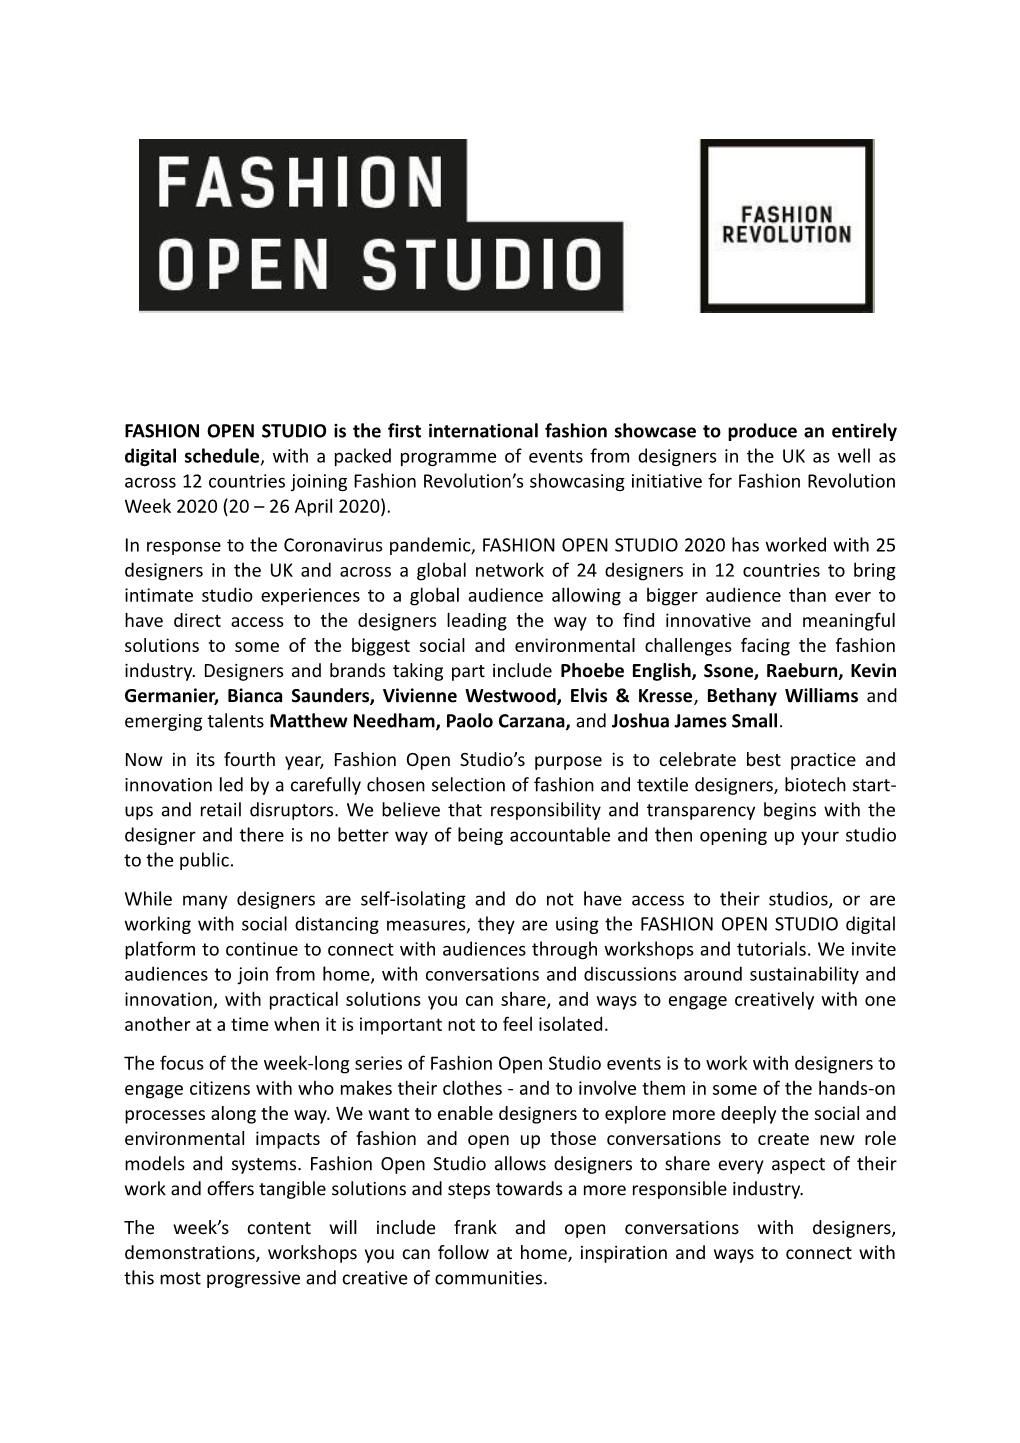 FASHION OPEN STUDIO Is the First International